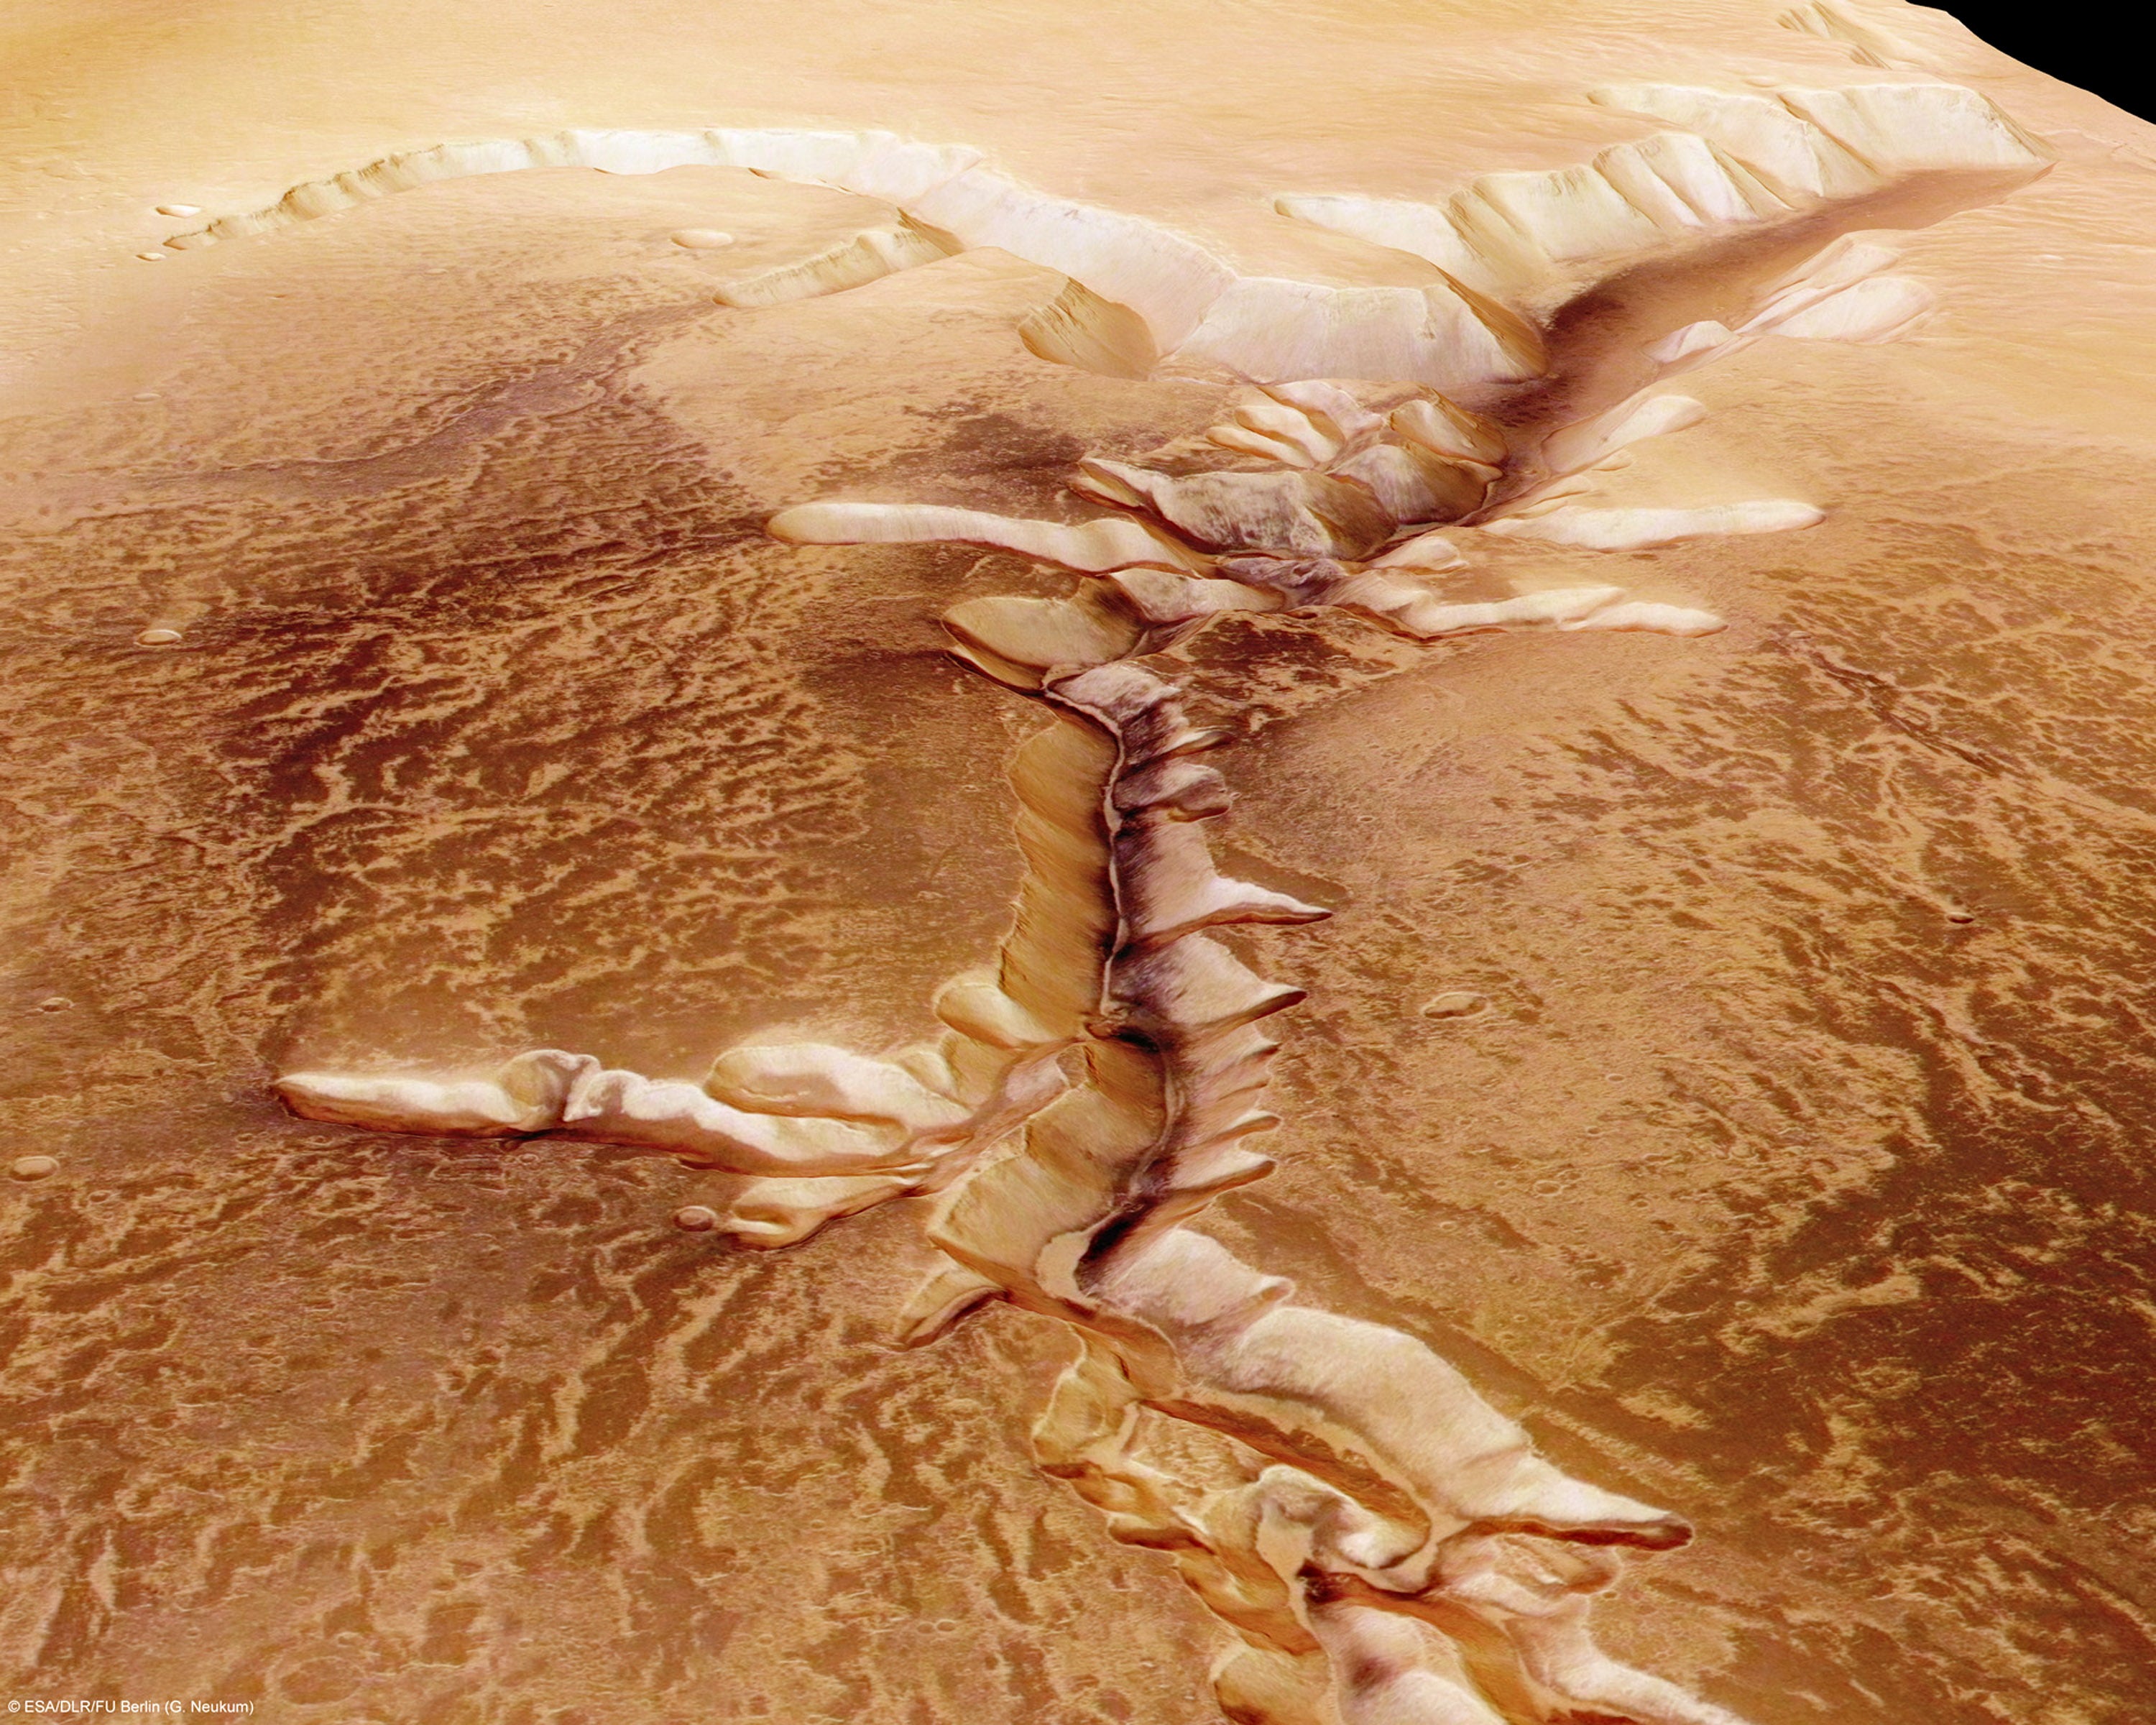 The Echus Chasma, one of the largest water source regions on Mars, is pictured from ESA’s Mars Express